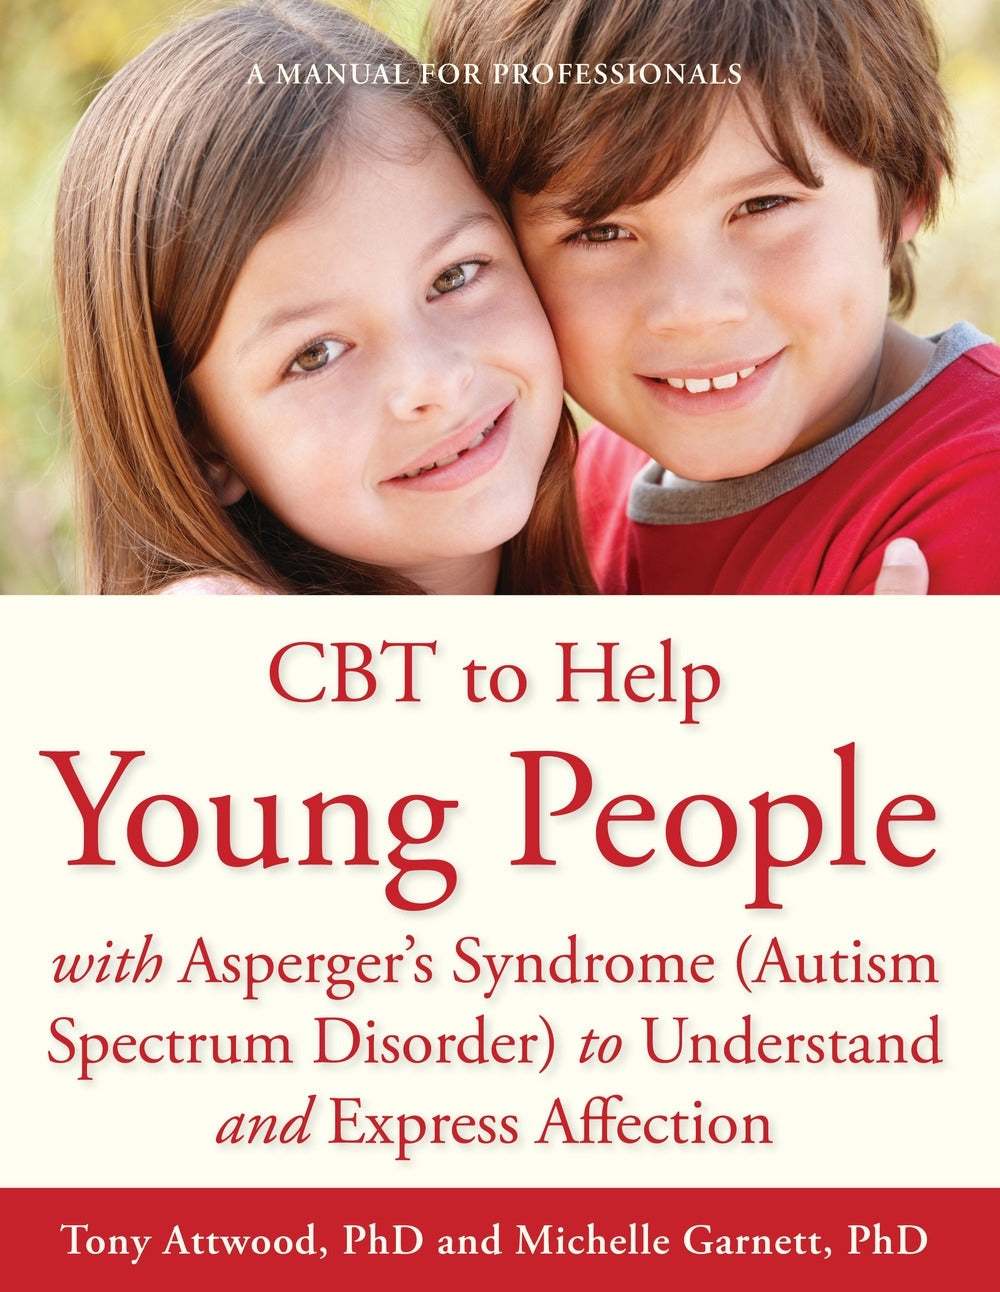 CBT to Help Young People with Asperger's Syndrome (Autism Spectrum Disorder) to Understand and Express Affection by Michelle Garnett, Dr Anthony Attwood